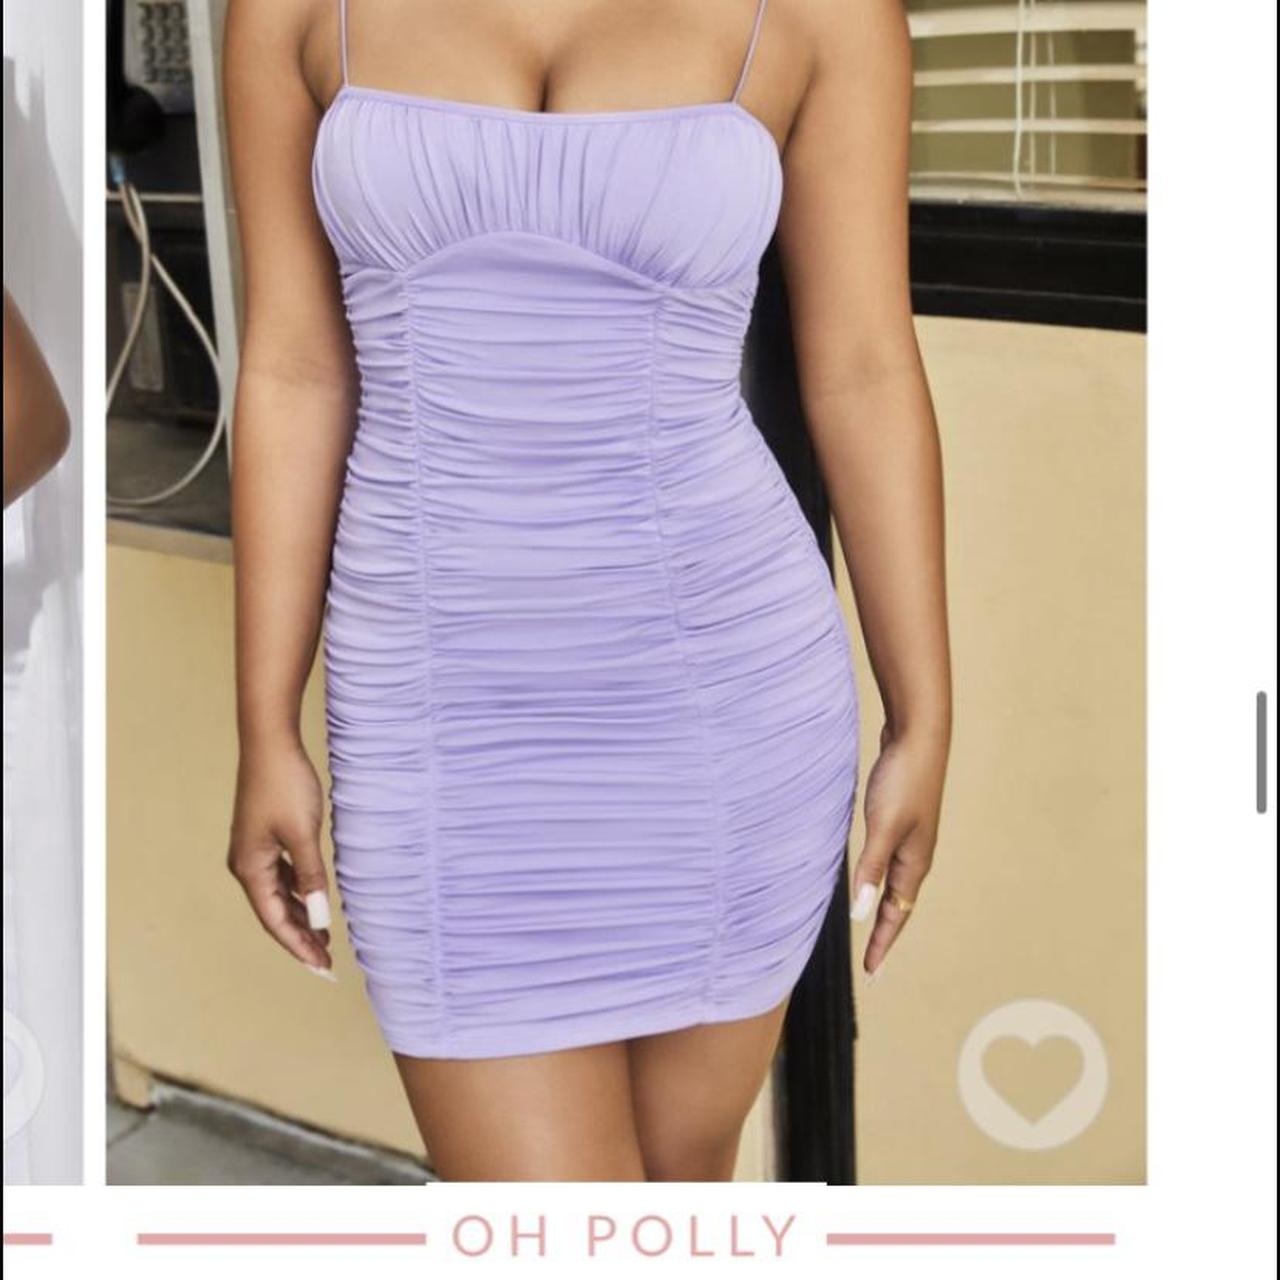 Lilac / purple ruched oh polly dress ...